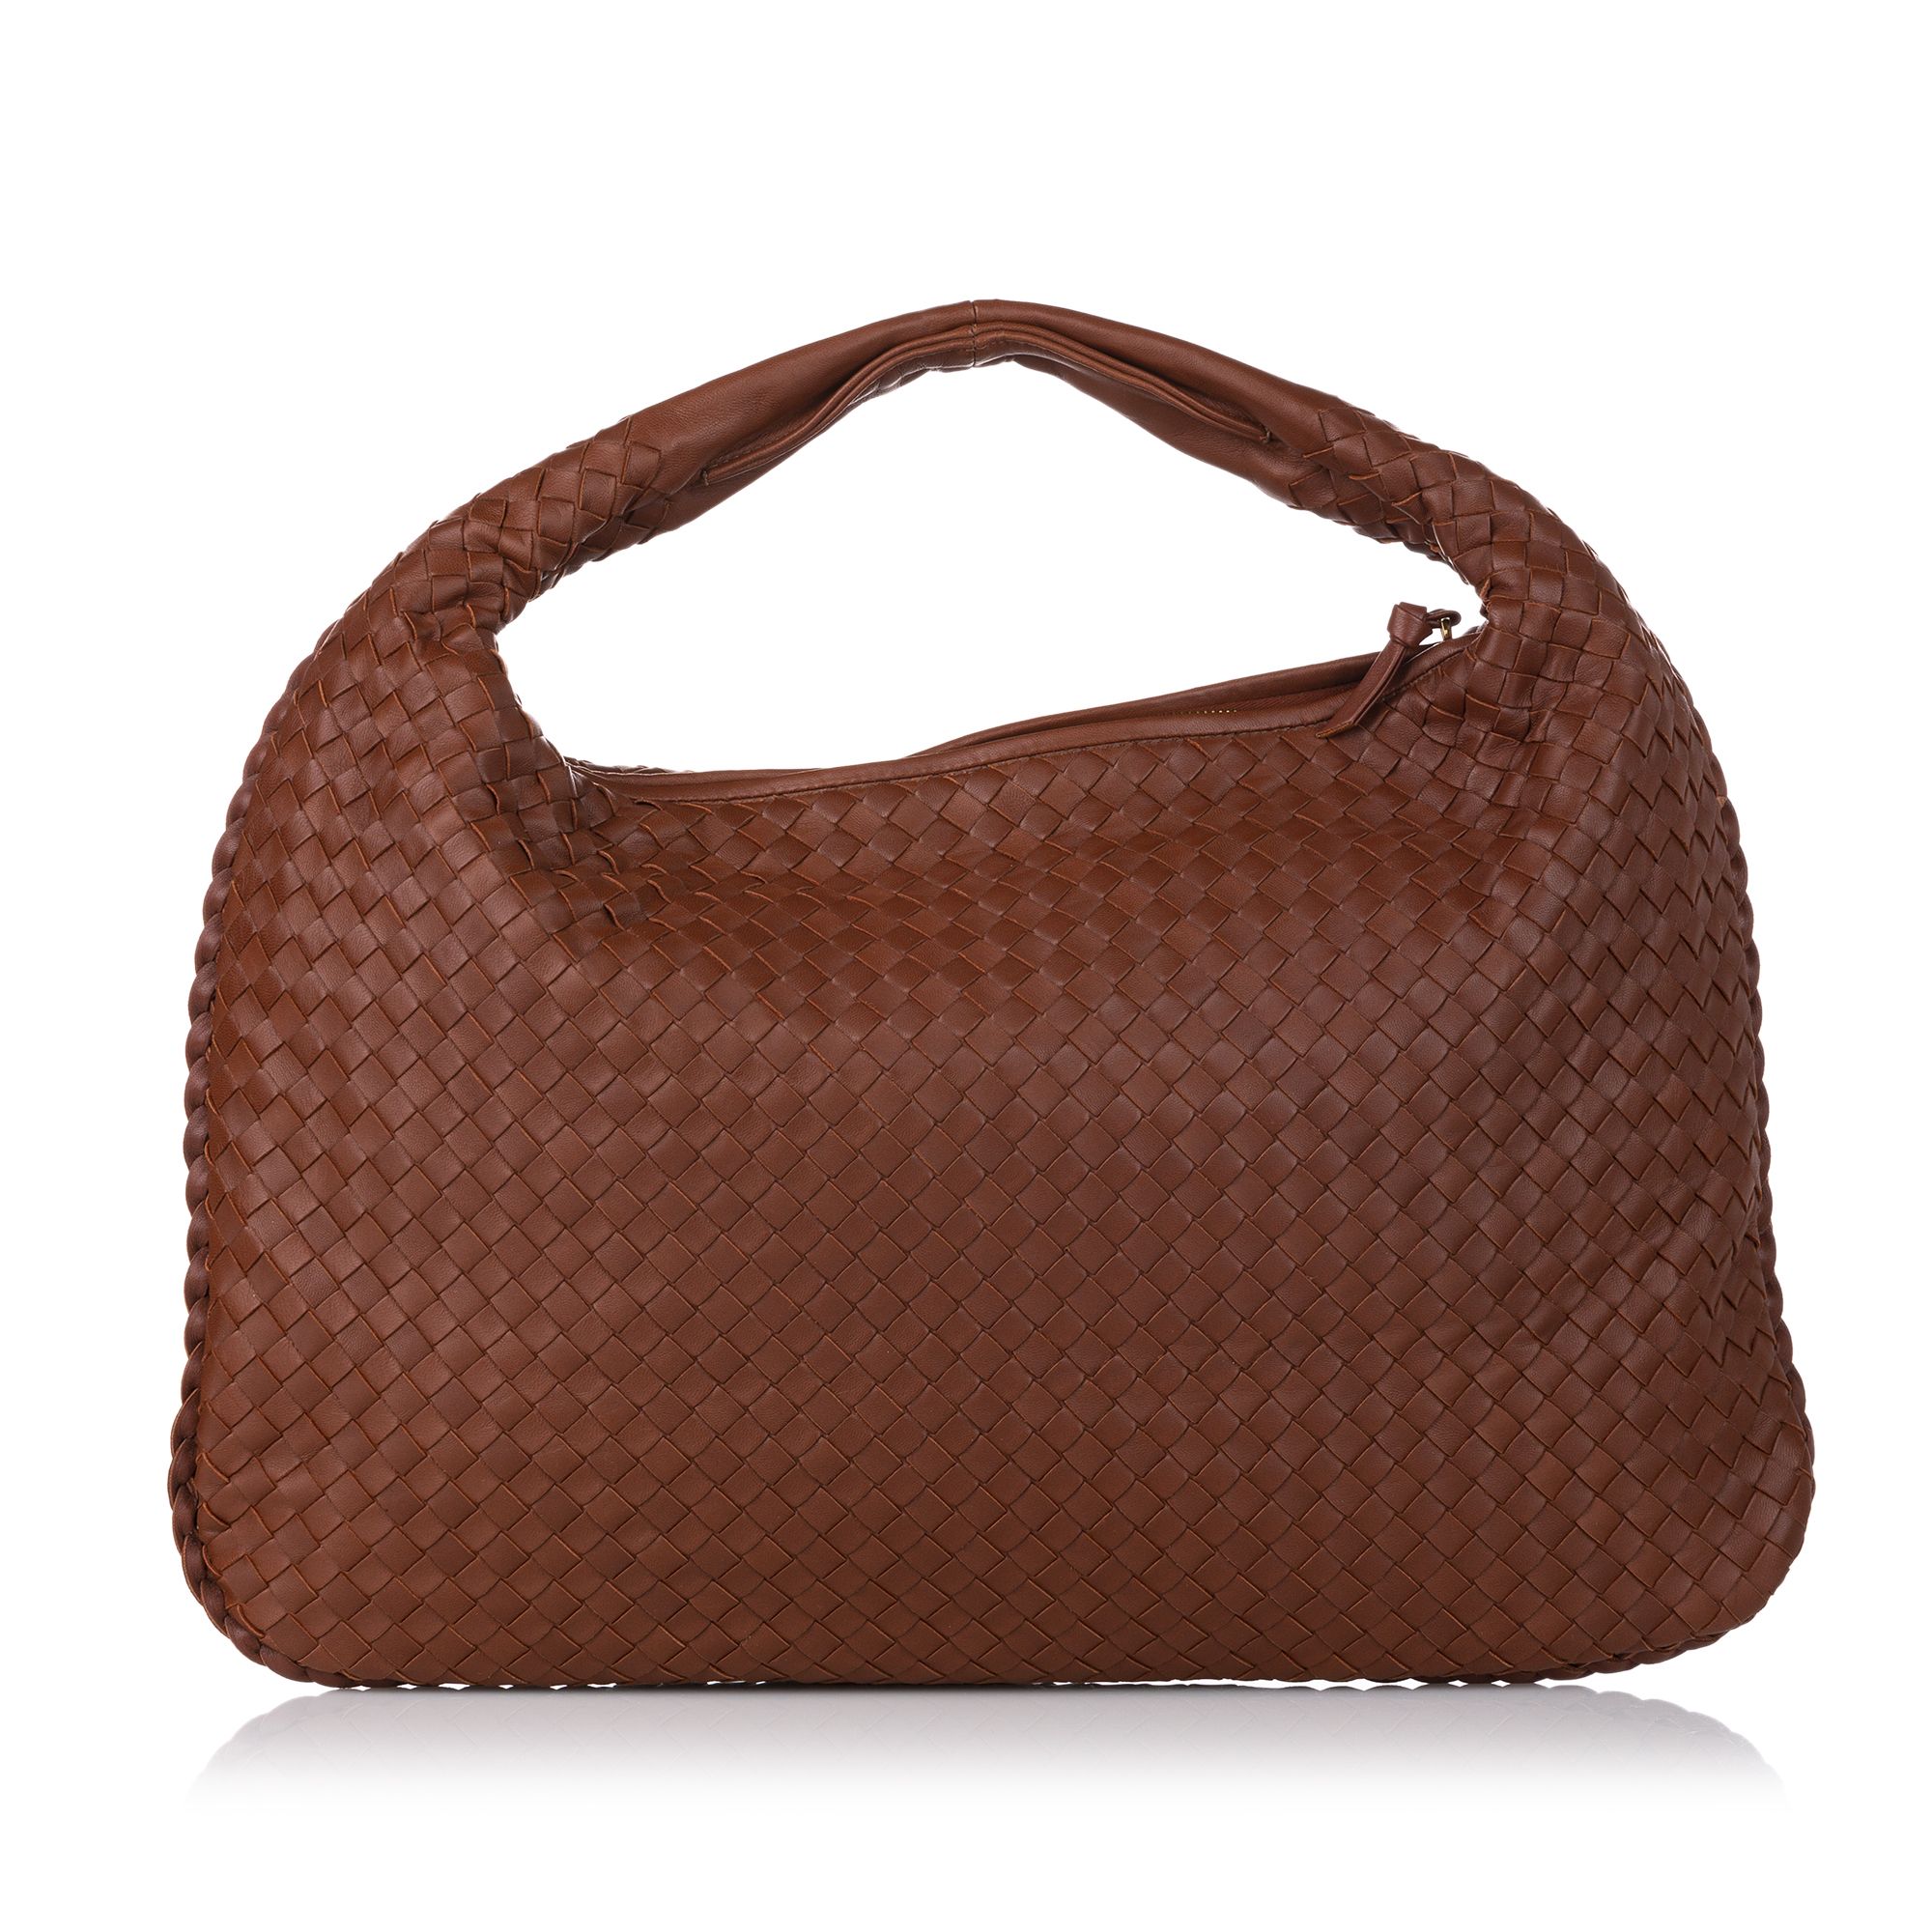 VINTAGE. RRP AS NEW. The Intrecciato hobo bag features a woven leather body, a flat strap, a top zip closure, and an interior zip pocket.

Dimensions:
Length 30cm
Width 46cm
Depth 3cm
Hand Drop 8cm

Original Accessories: Dust Bag, Dust Bag, Authenticity Card

Serial Number: 115654 V0013 6308 EPEV 2008 5952 A
Color: Brown
Material: Leather x Calf
Country of Origin: Italy
Boutique Reference: SSU154992K1342


Product Rating: GoodCondition

Certificate of Authenticity is available upon request with no extra fee required. Please contact our customer service team.